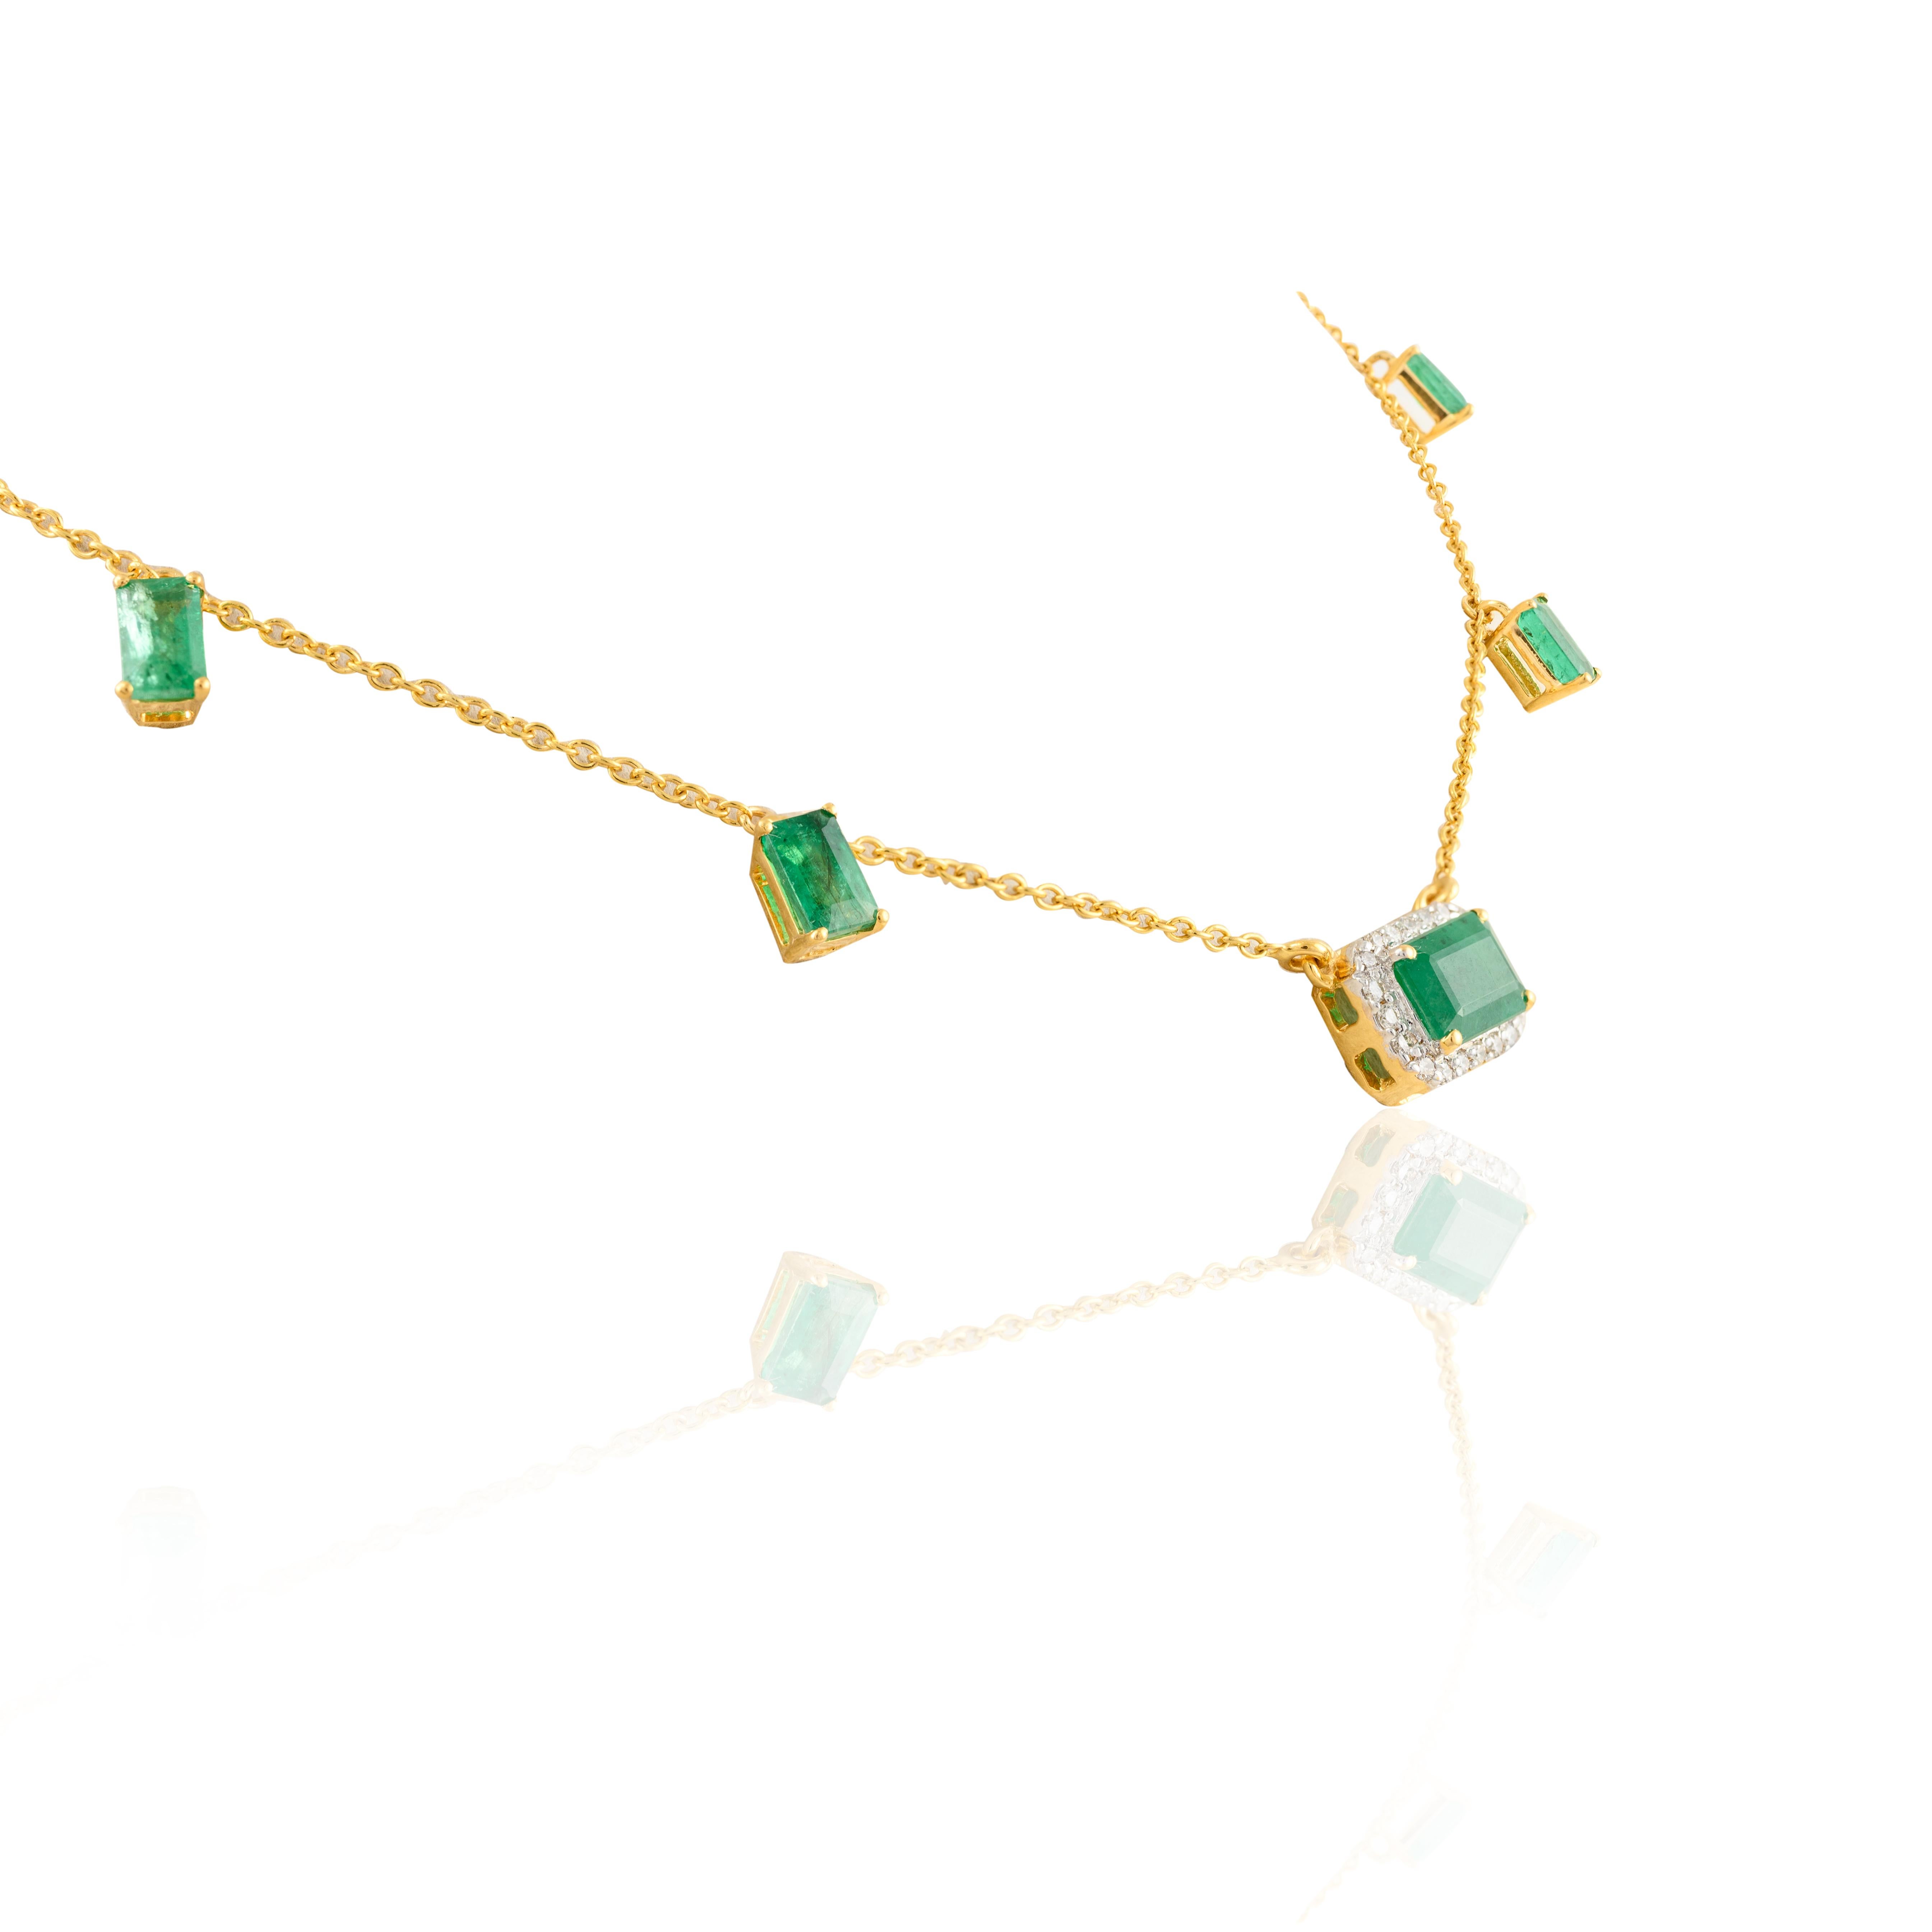 Emerald Charm Necklace in 14K Gold studded with octagon cut emerald and diamonds. This stunning piece of jewelry instantly elevates a casual look or dressy outfit. 
Emerald enhances intellectual capacity of the person.
Designed with octagon cut